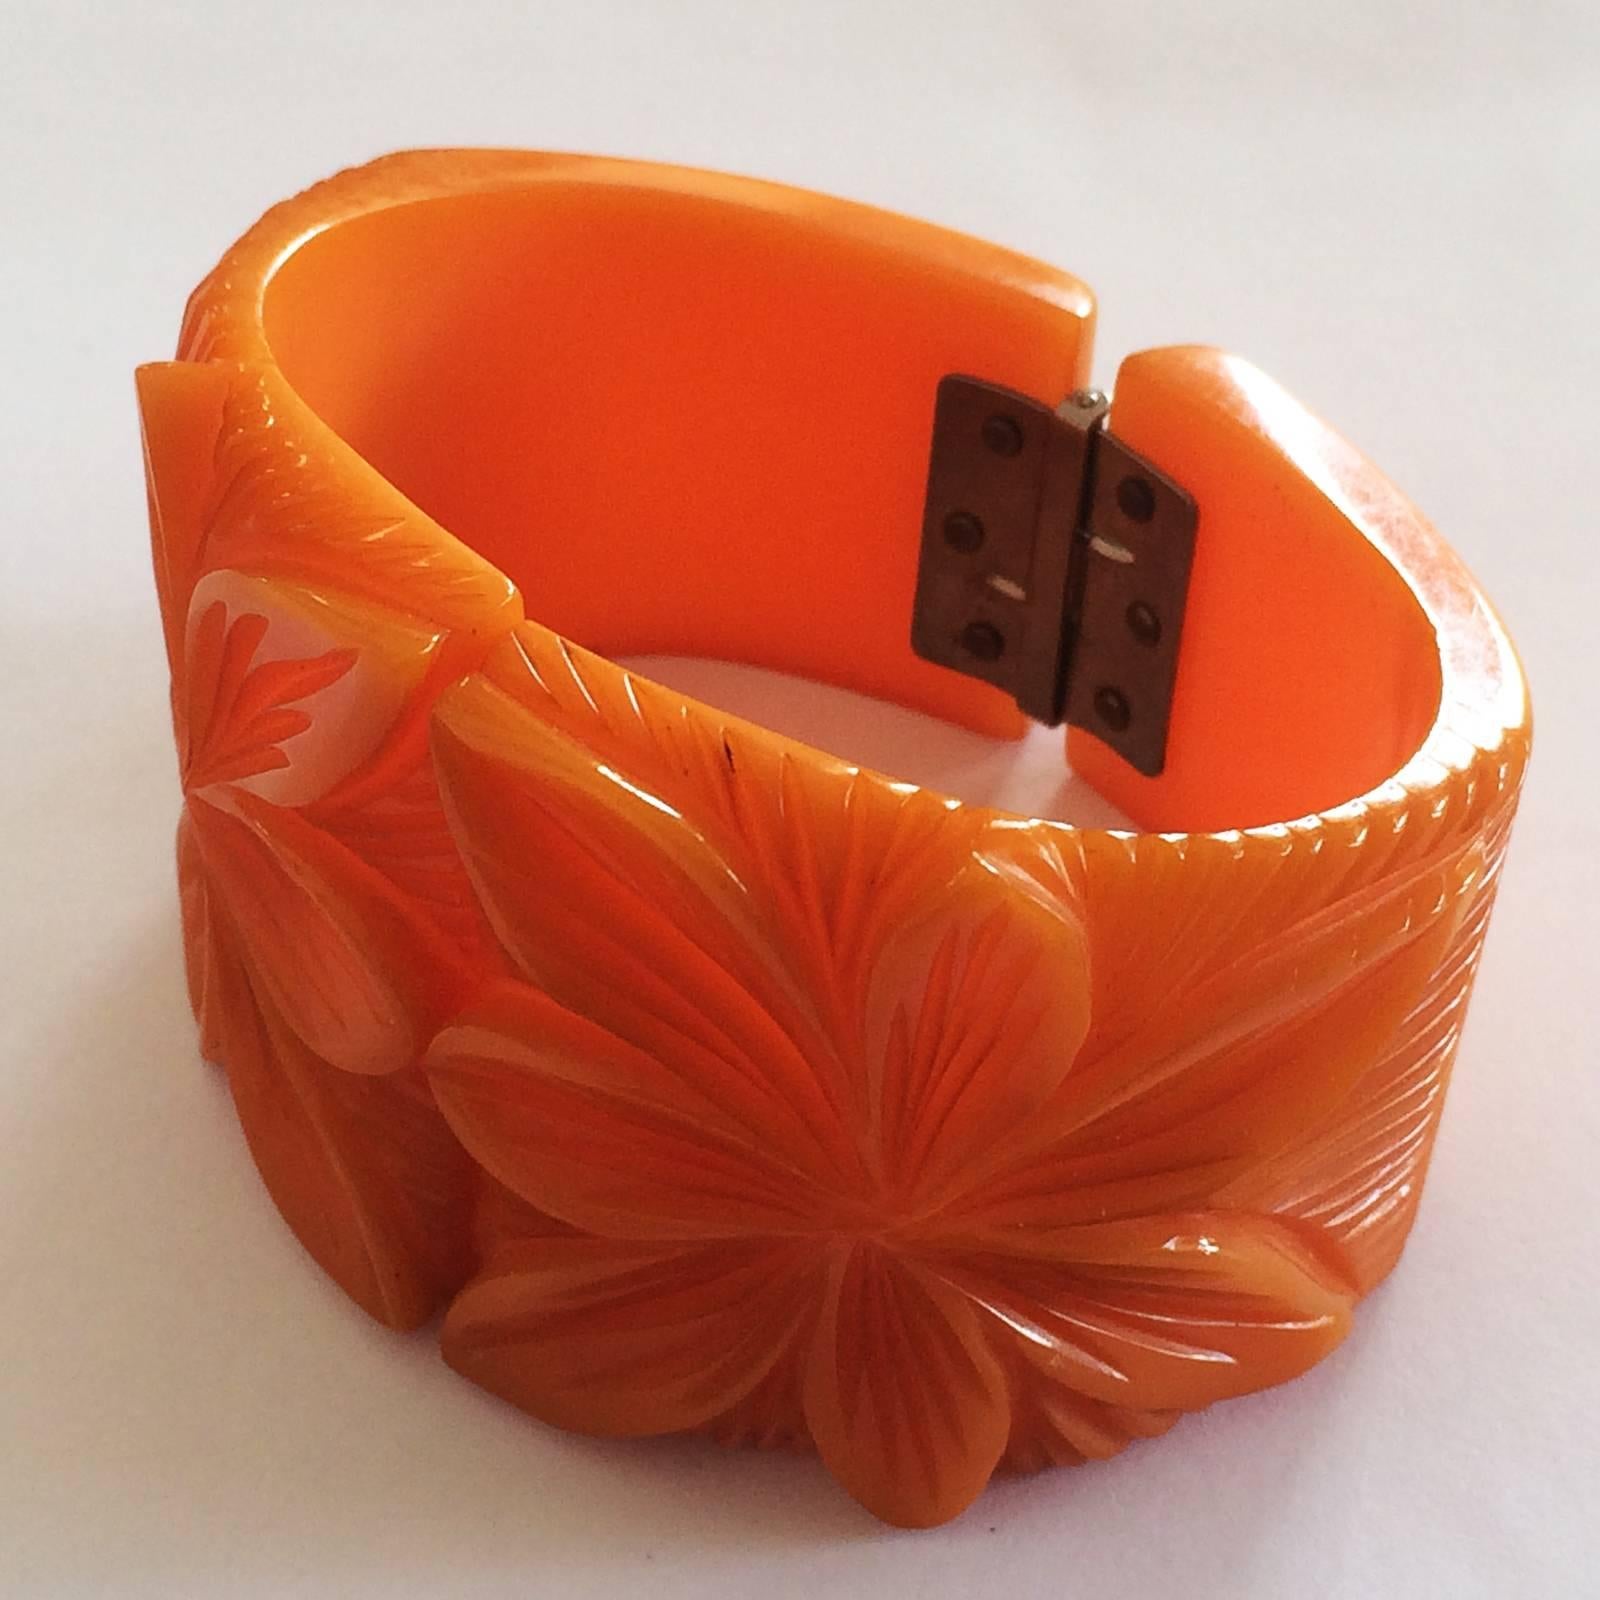 Art Deco Clamper Bangle heavily carved, desirable and Rare Solid Orange Bakelite with a deeply carved Flower to each side of the front. Original nickel plate, rivetted pin, spring hinge in perfect working condition, with no damage, no repairs at all